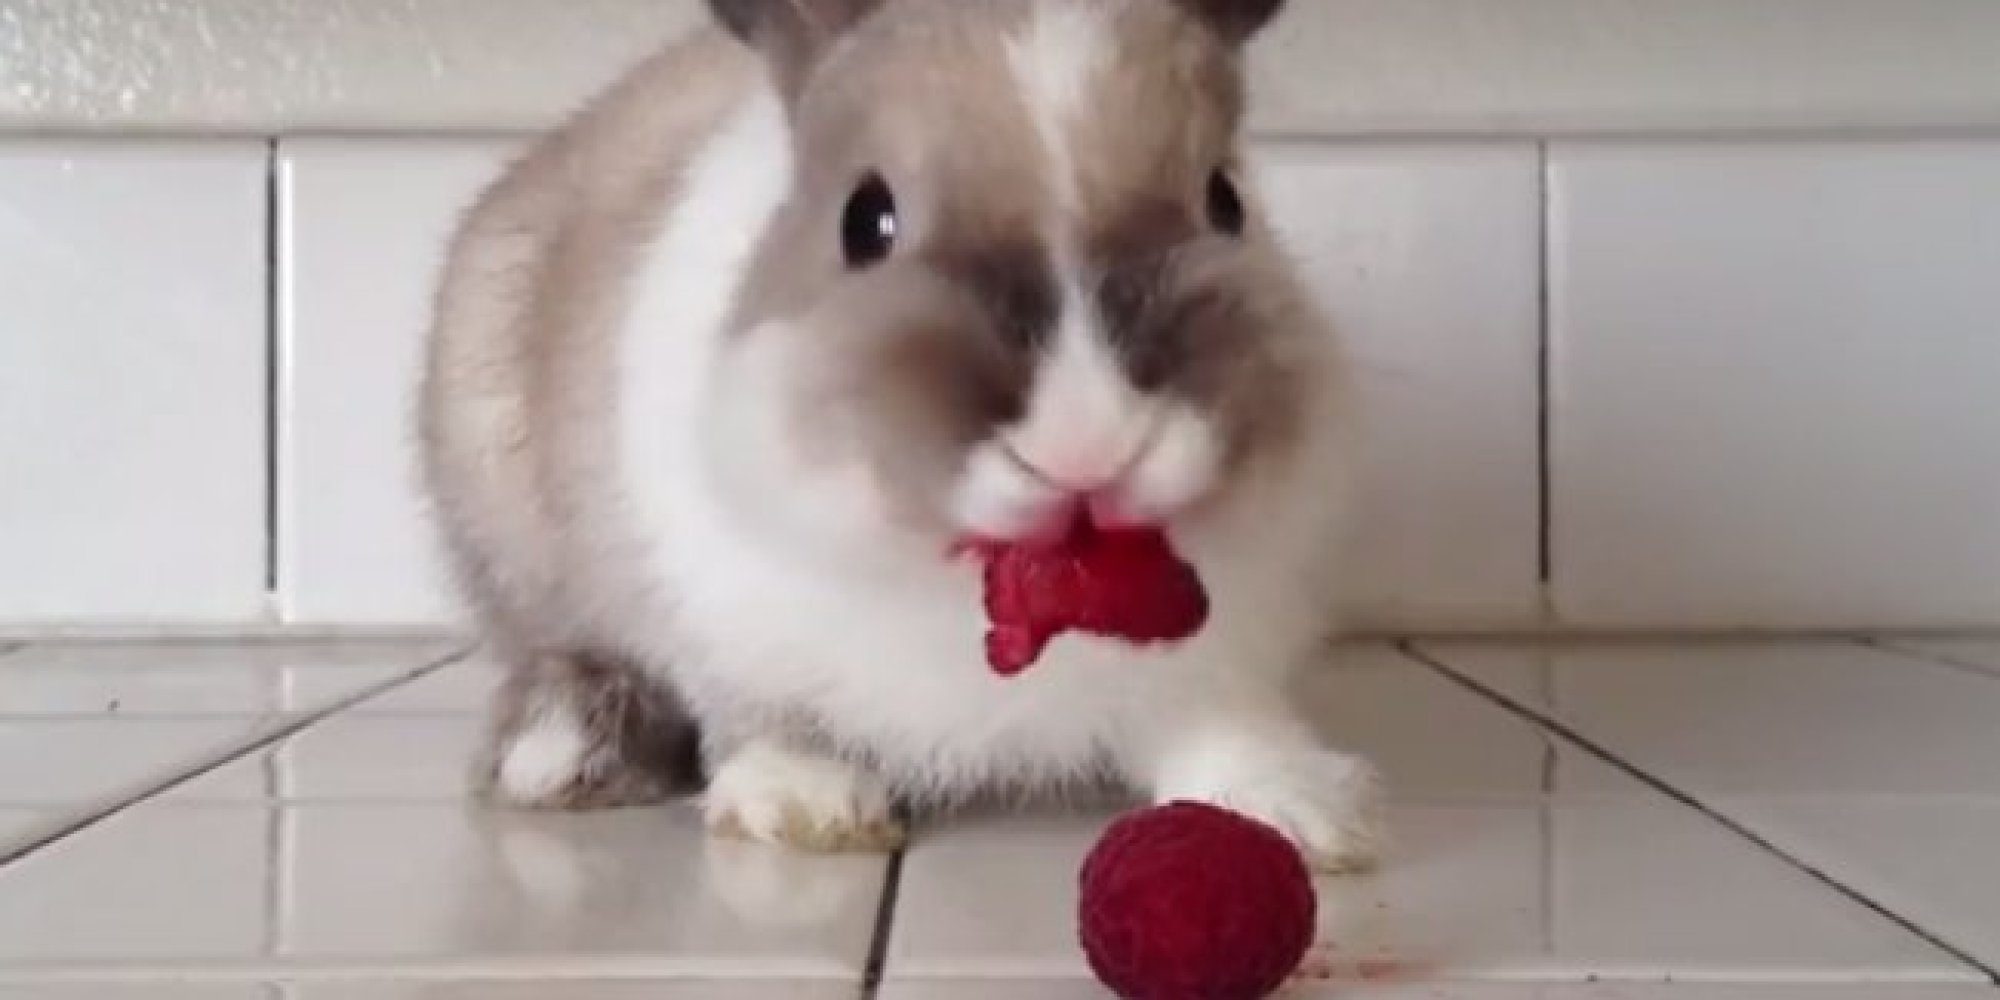 This Bunny Is Just Eating Some Raspberries, But It Sure Looks Like ...